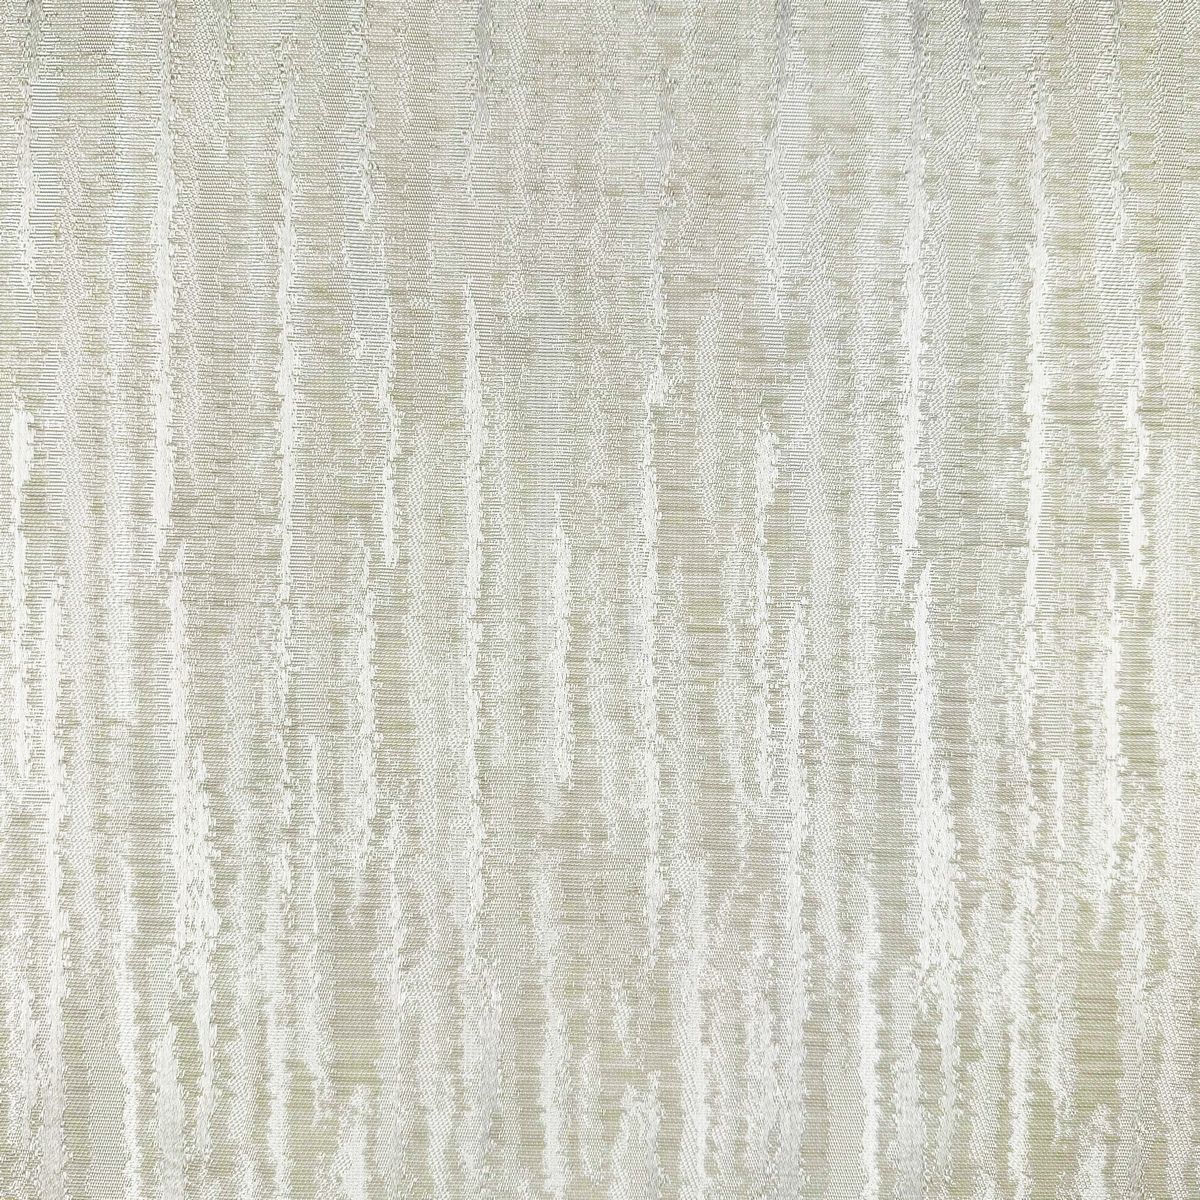 Halsway Creme Fabric by Chatham Glyn